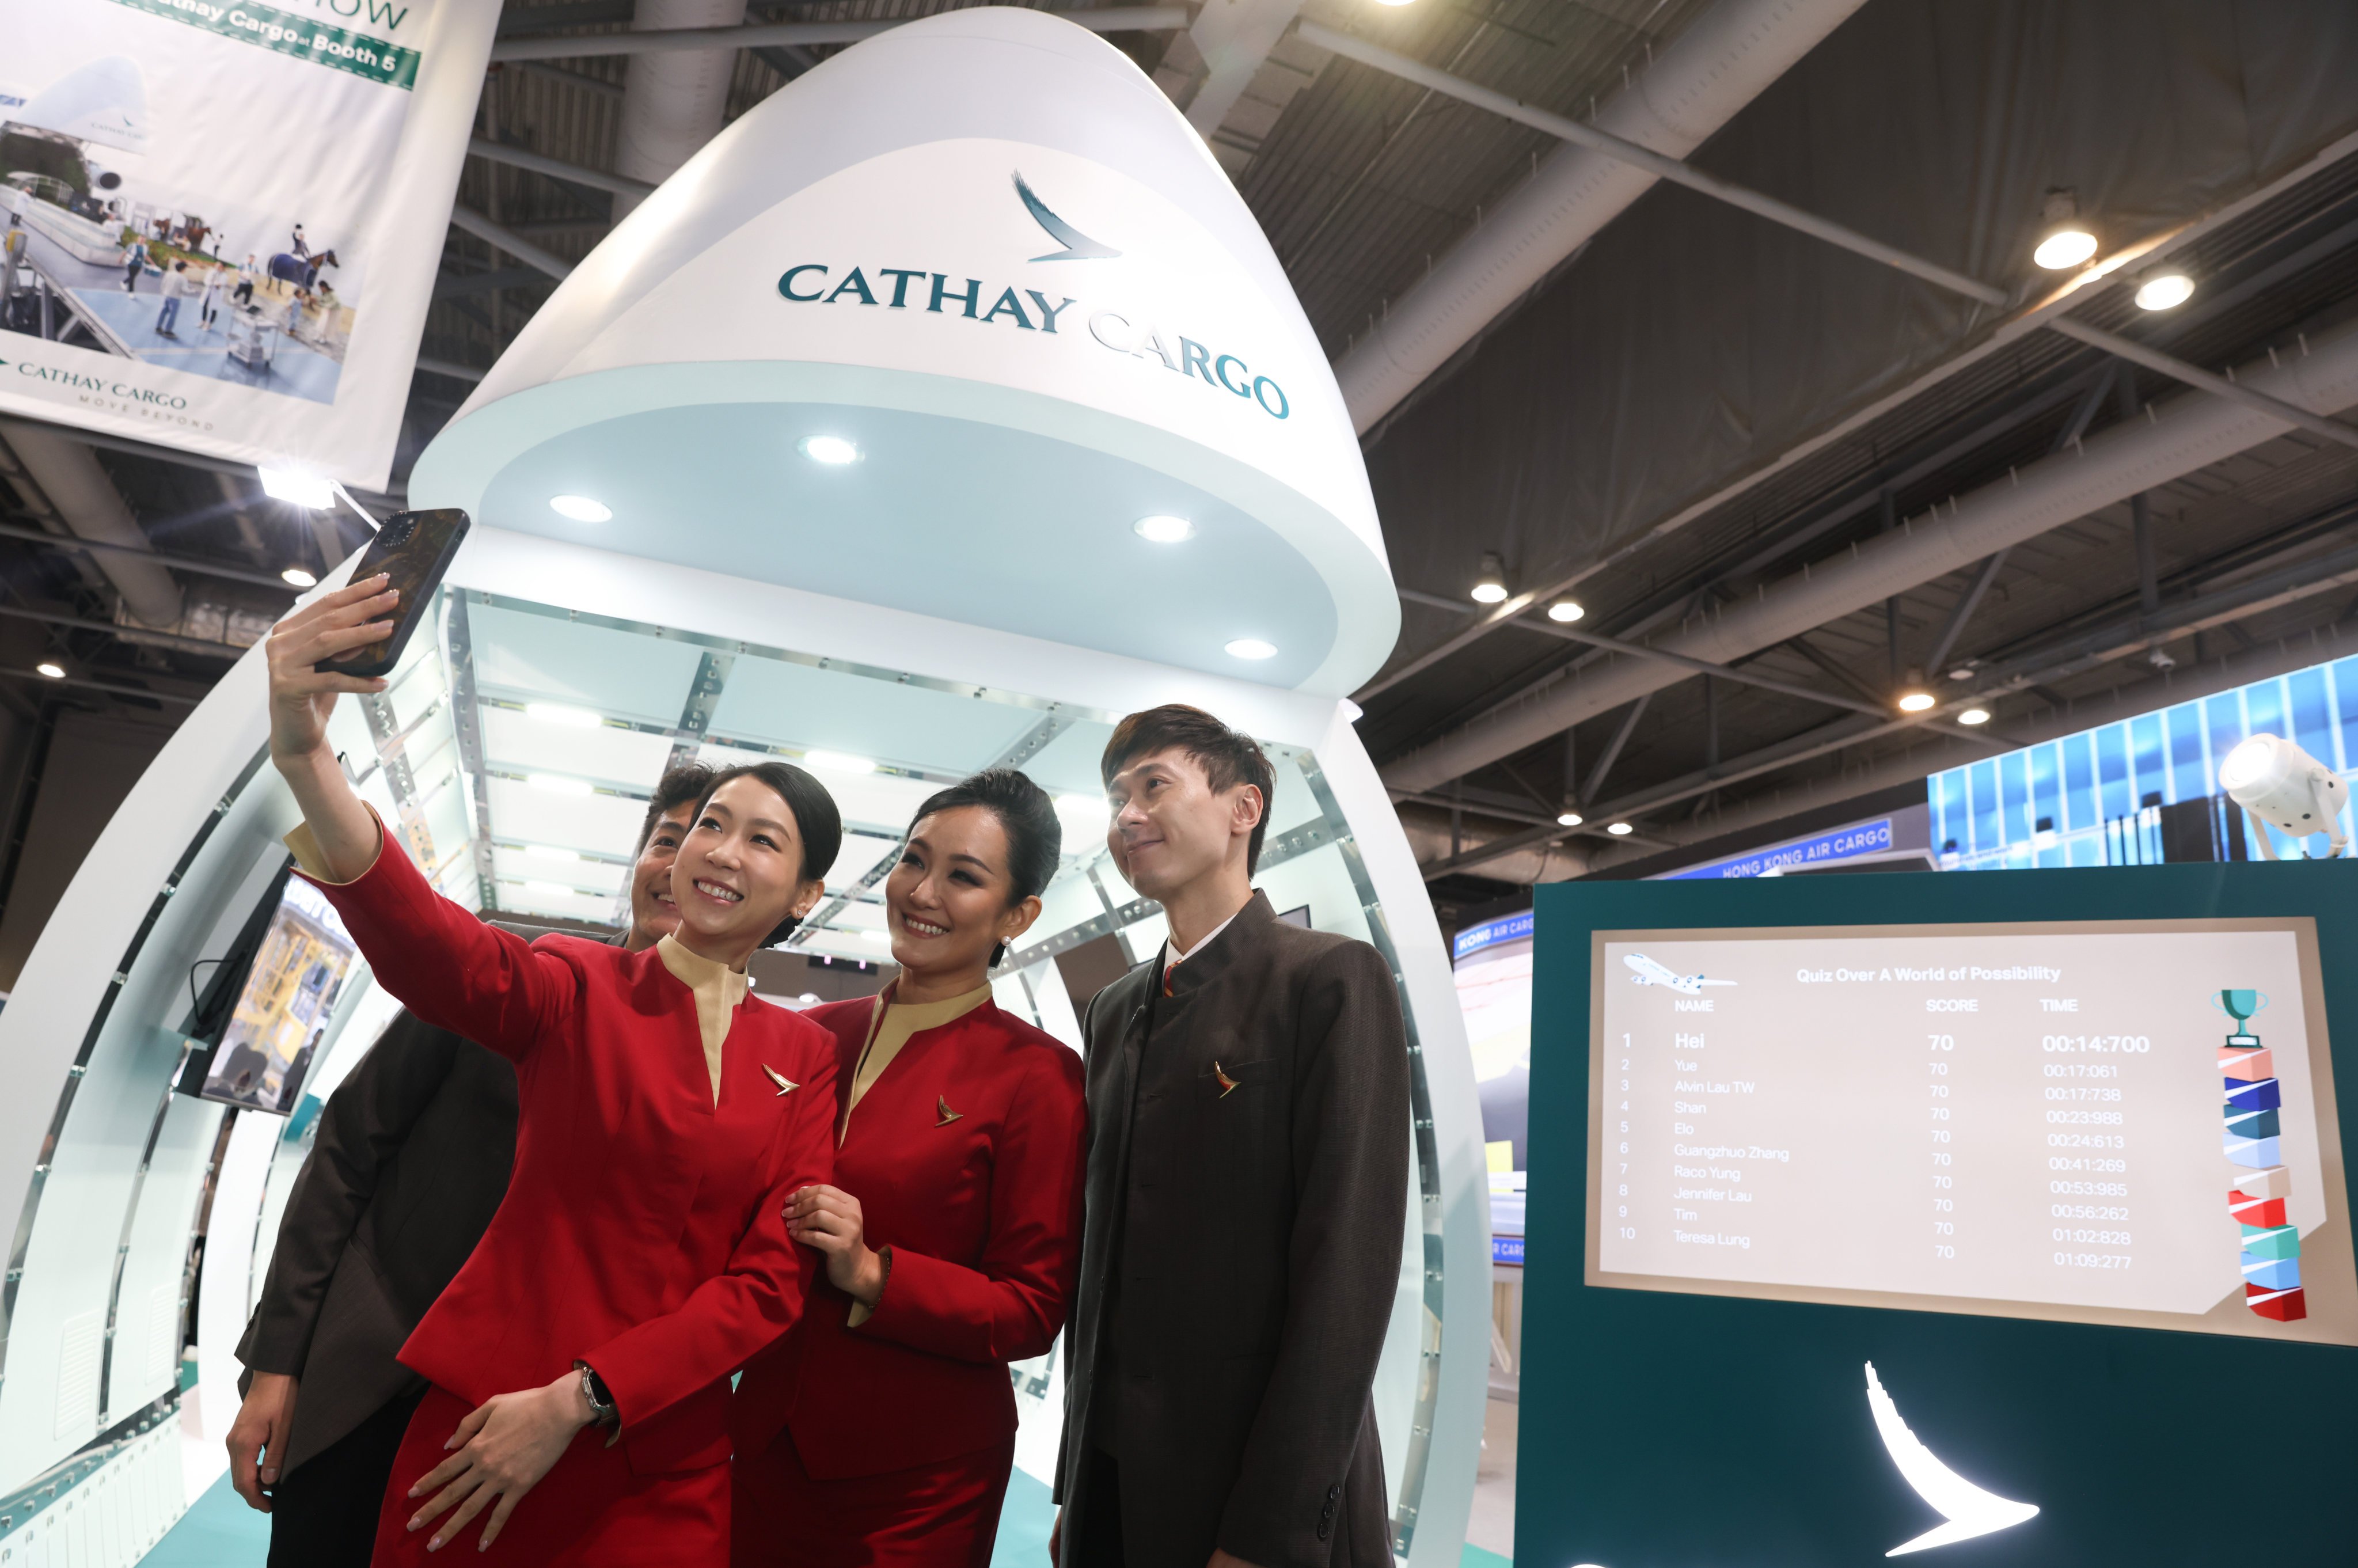 Cathay Pacific flight attendants take a selfie at the airline’s booth during the IATA World Cargo Symposium at AsiaWorld-Expo on March 12. Photo: Yik Yeung-man